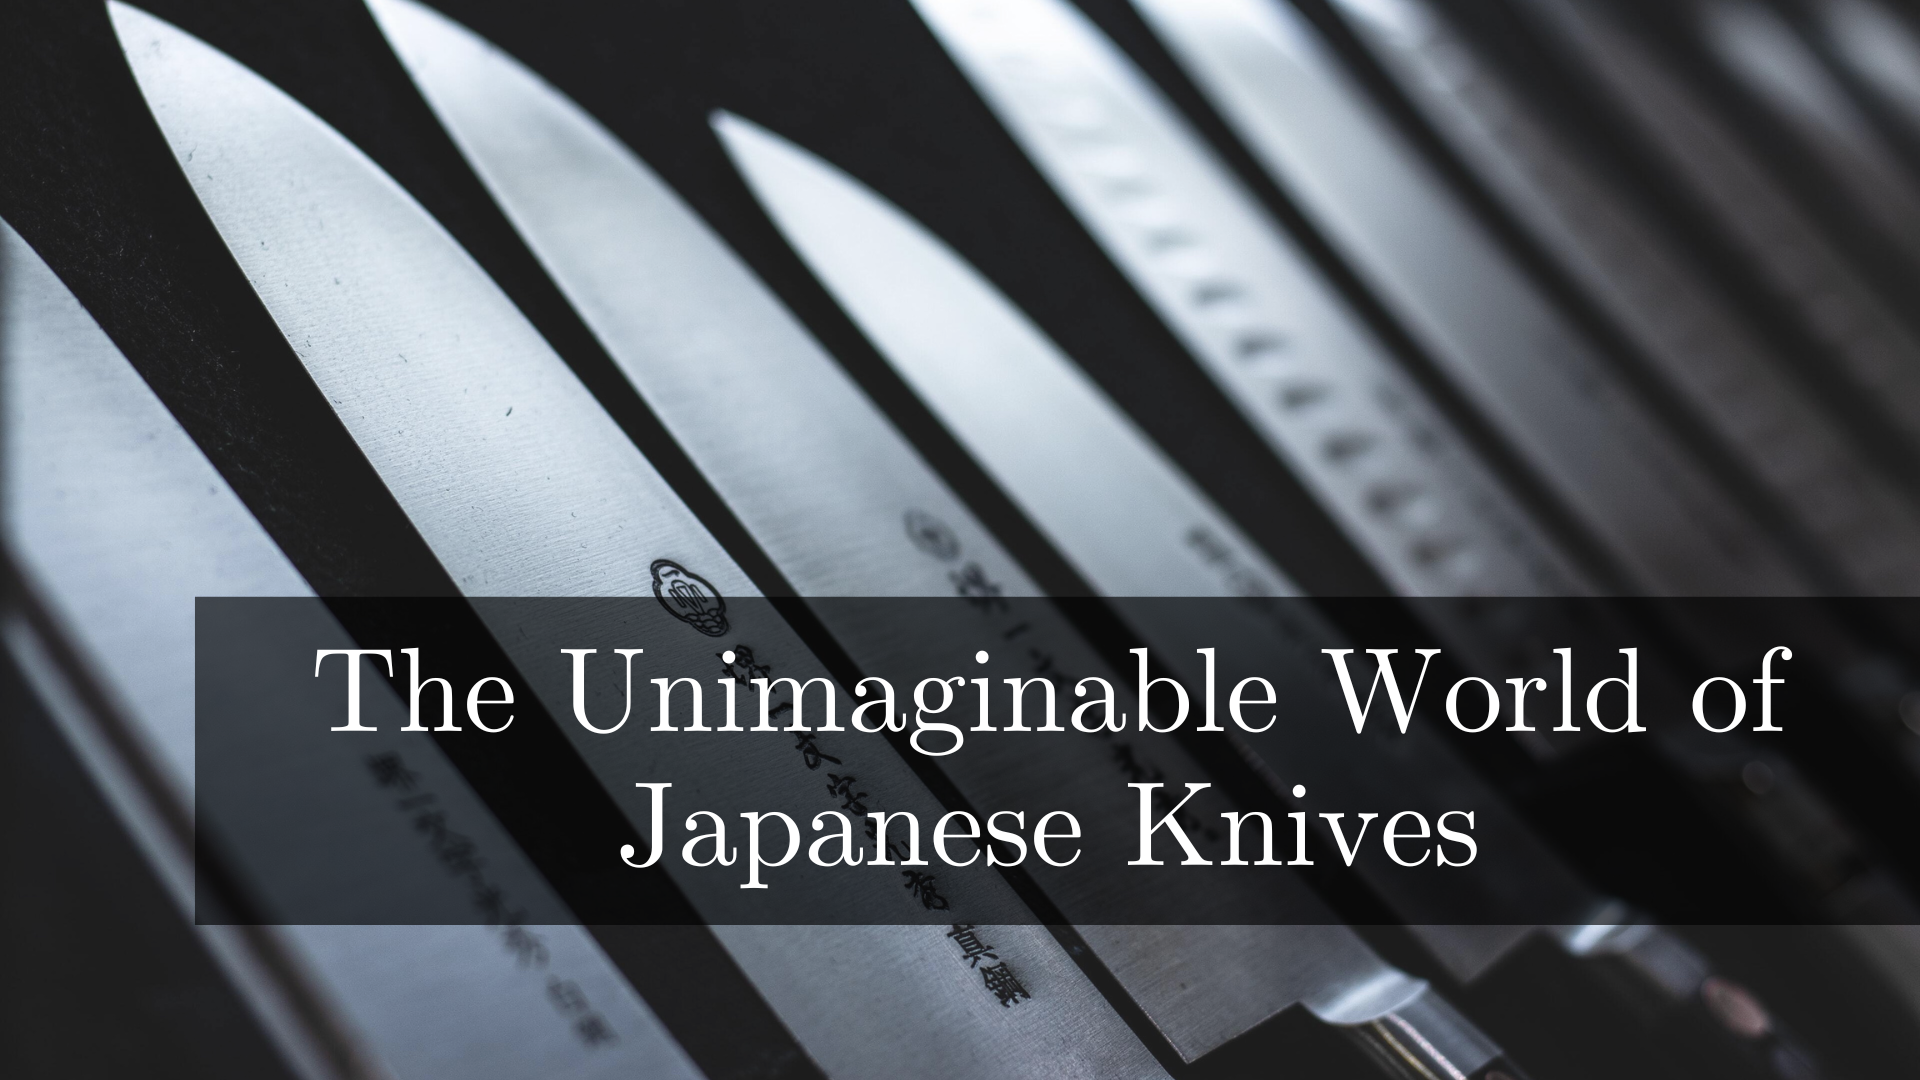 The Unimaginable World of Japanese Knives